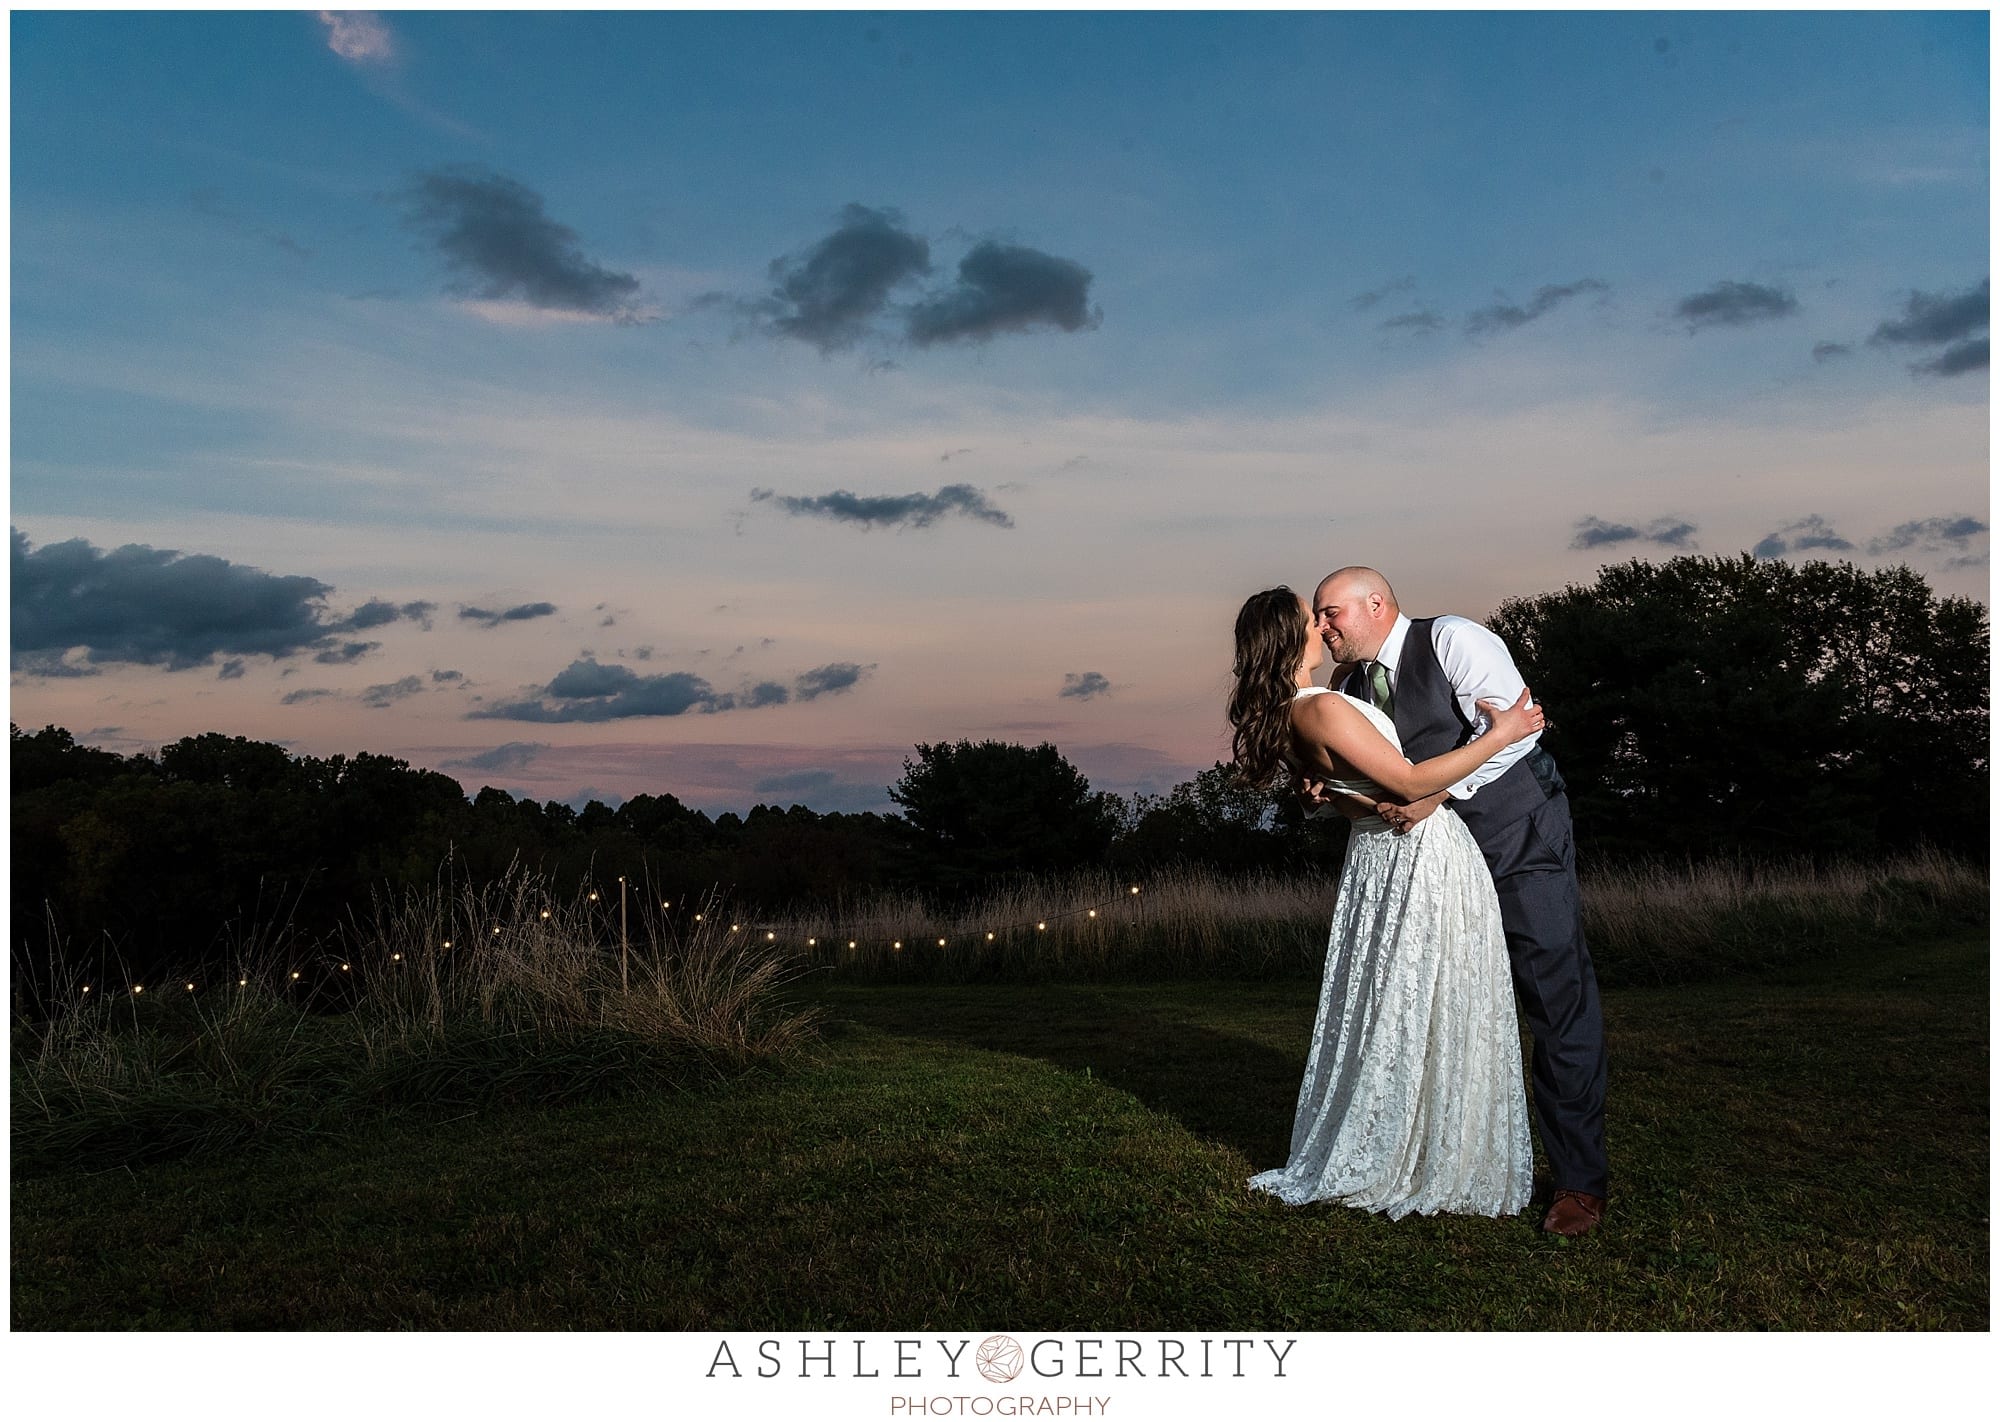 Sunset portrait of groom dipping bride with a sweeping rustic view.